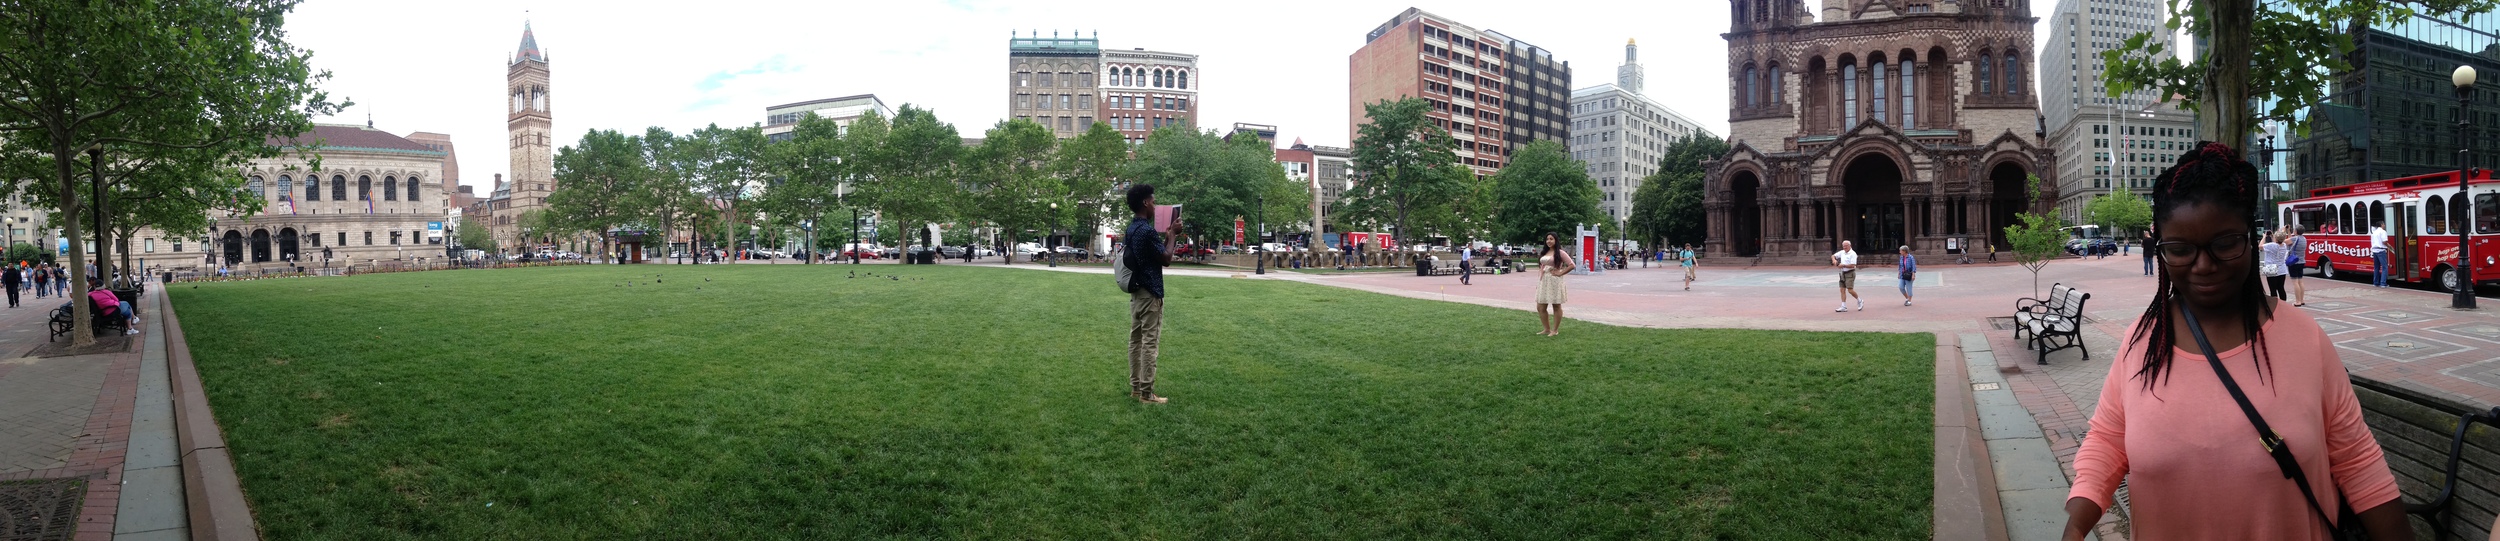 Panoramic of Copley Square